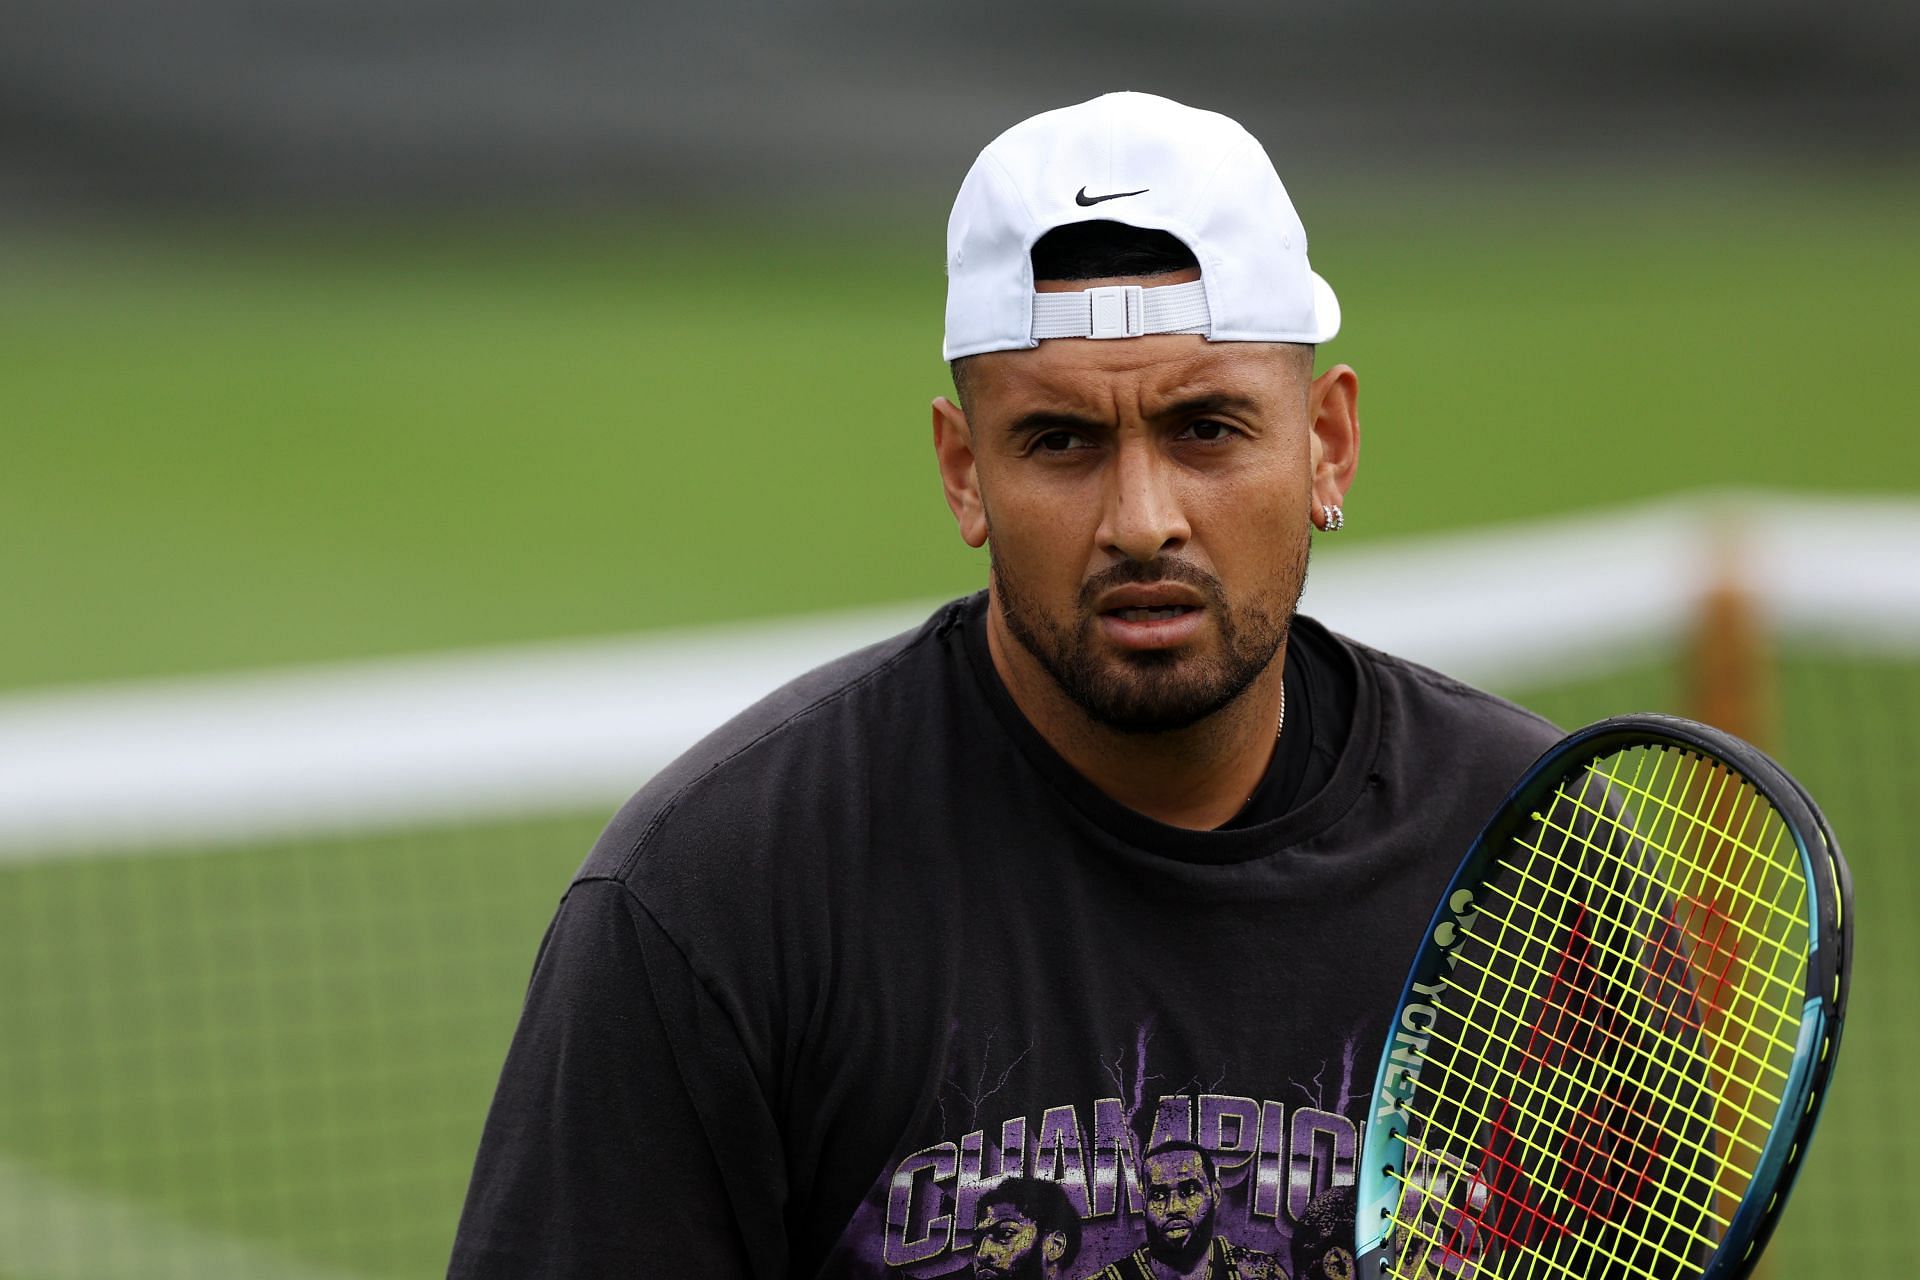 Nick Kyrgios in practice before being sidelined by a wrist injury.